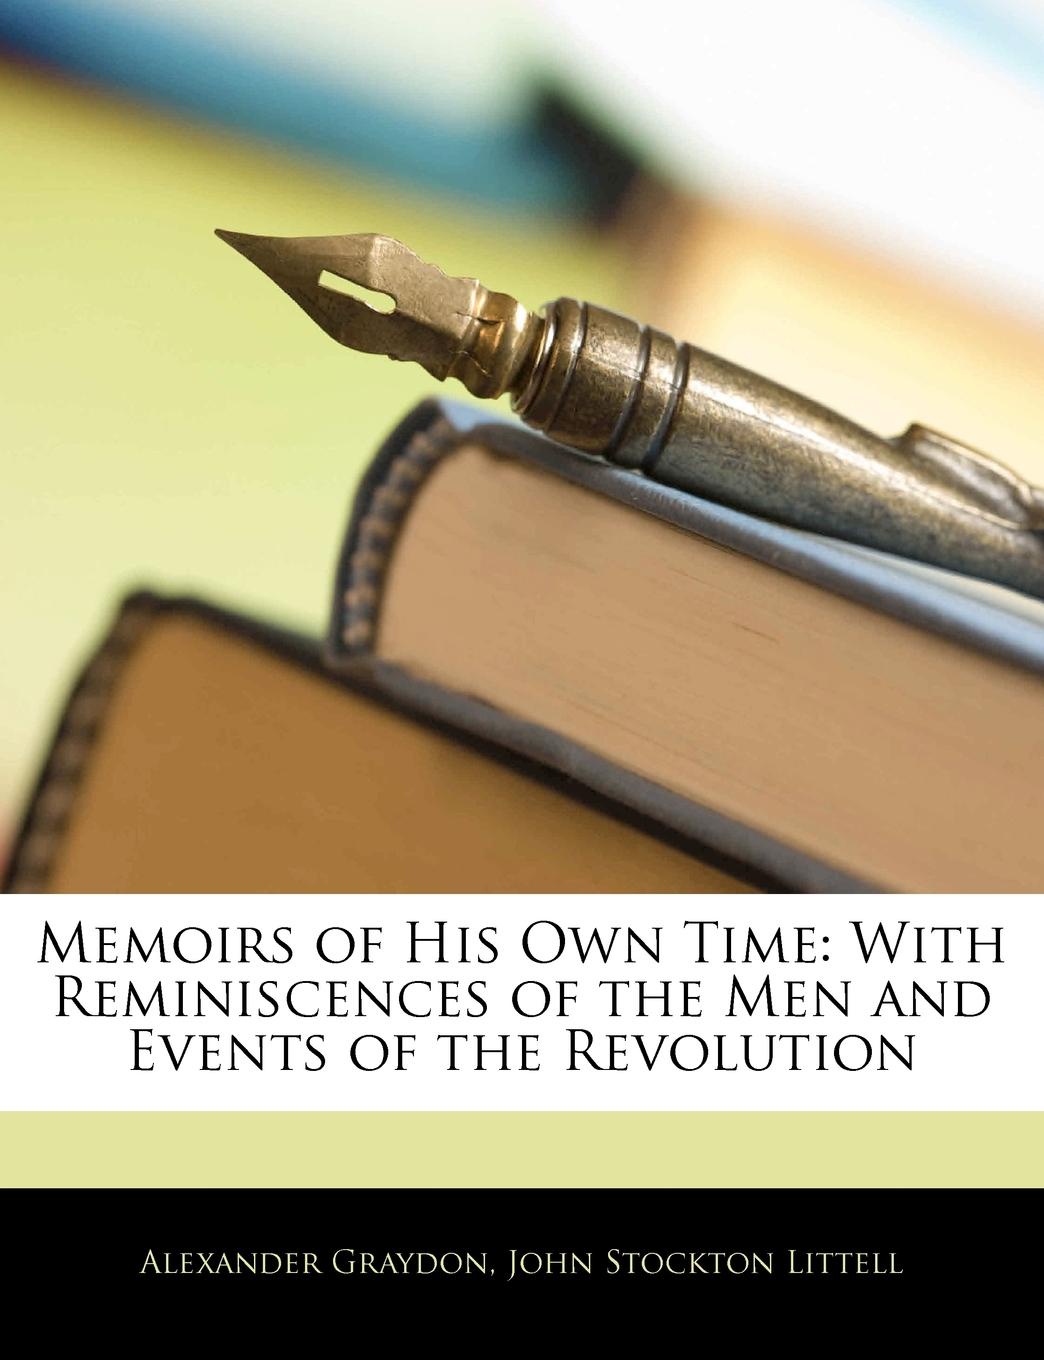 Memoirs of His Own Time. With Reminiscences of the Men and Events of the Revolution